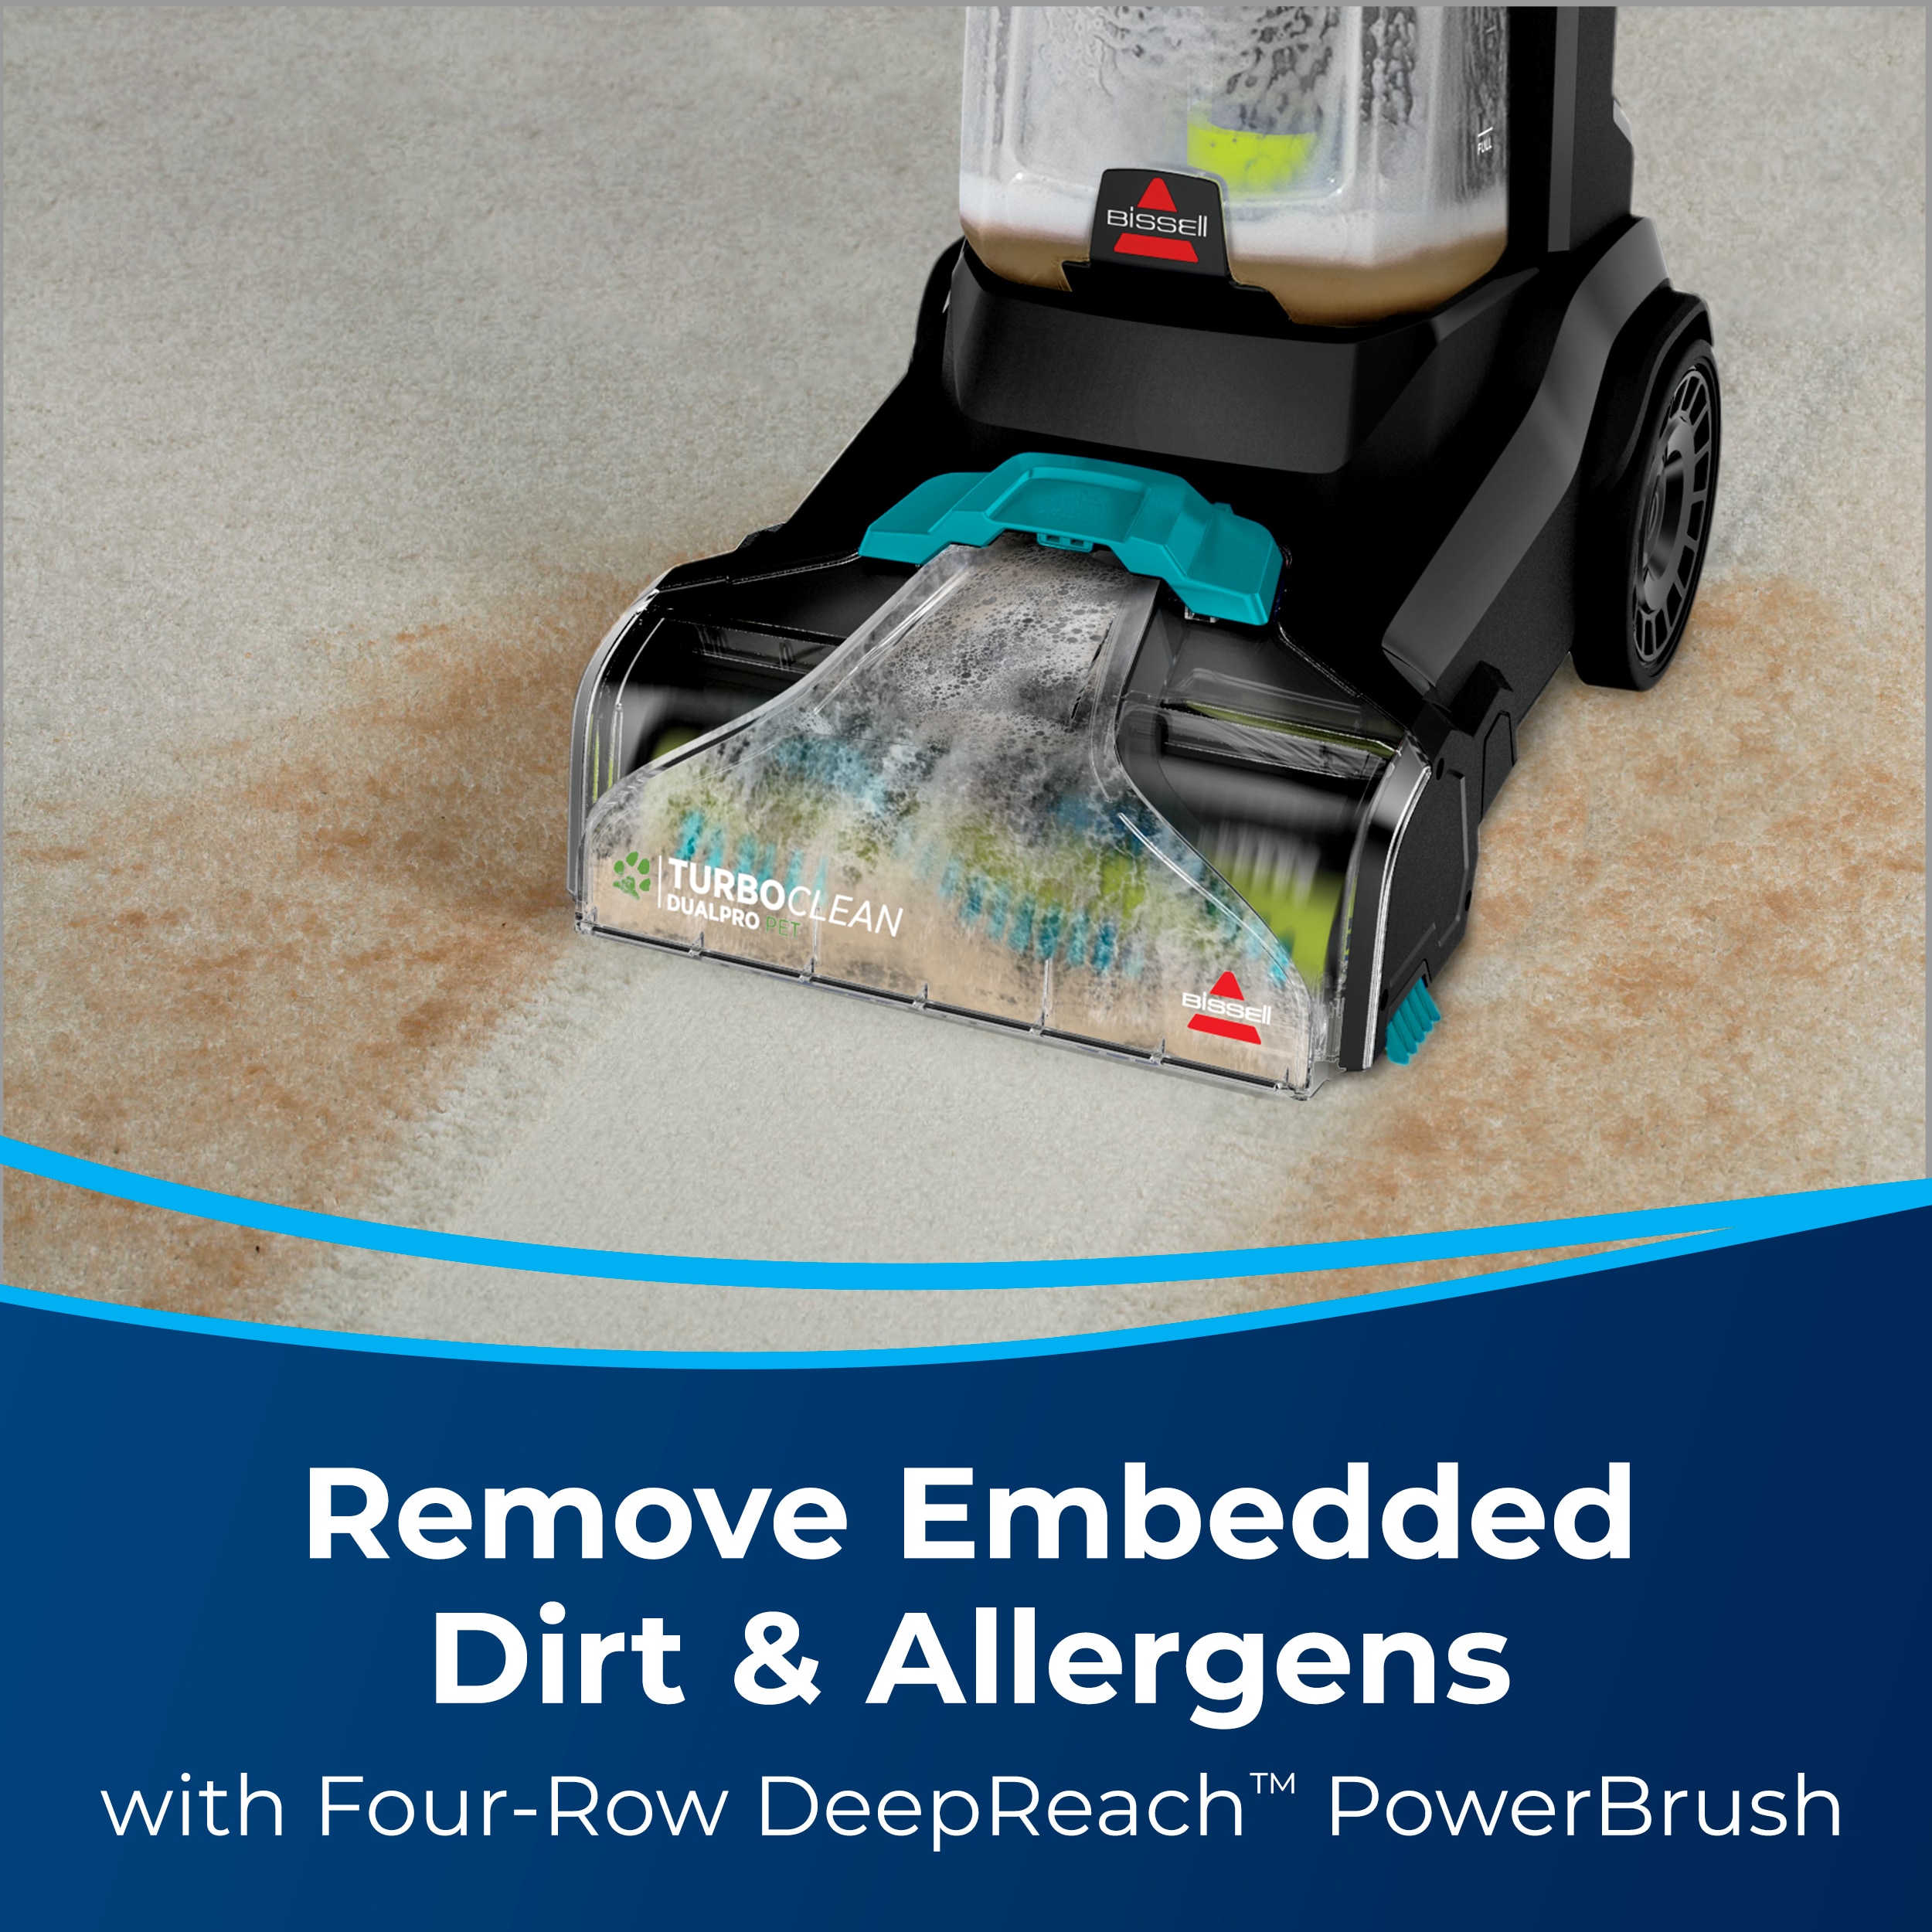 Carpet & Steam Cleaning at